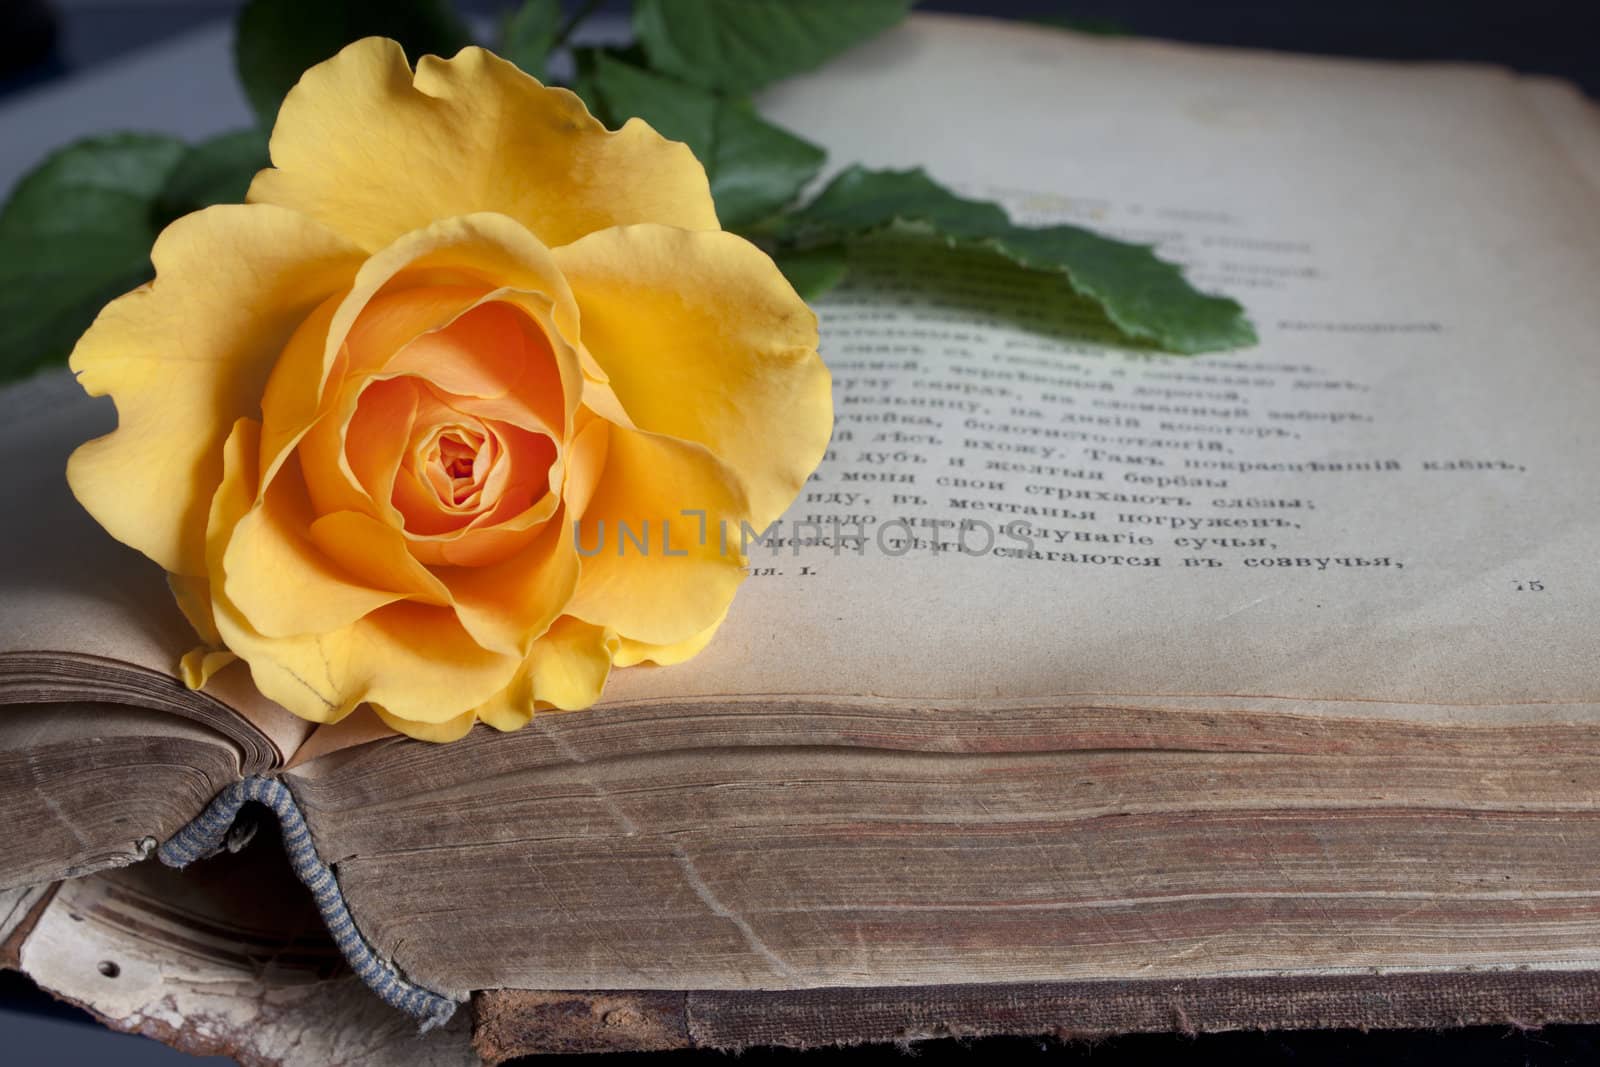 Old book and fresh rose - beauty of literature